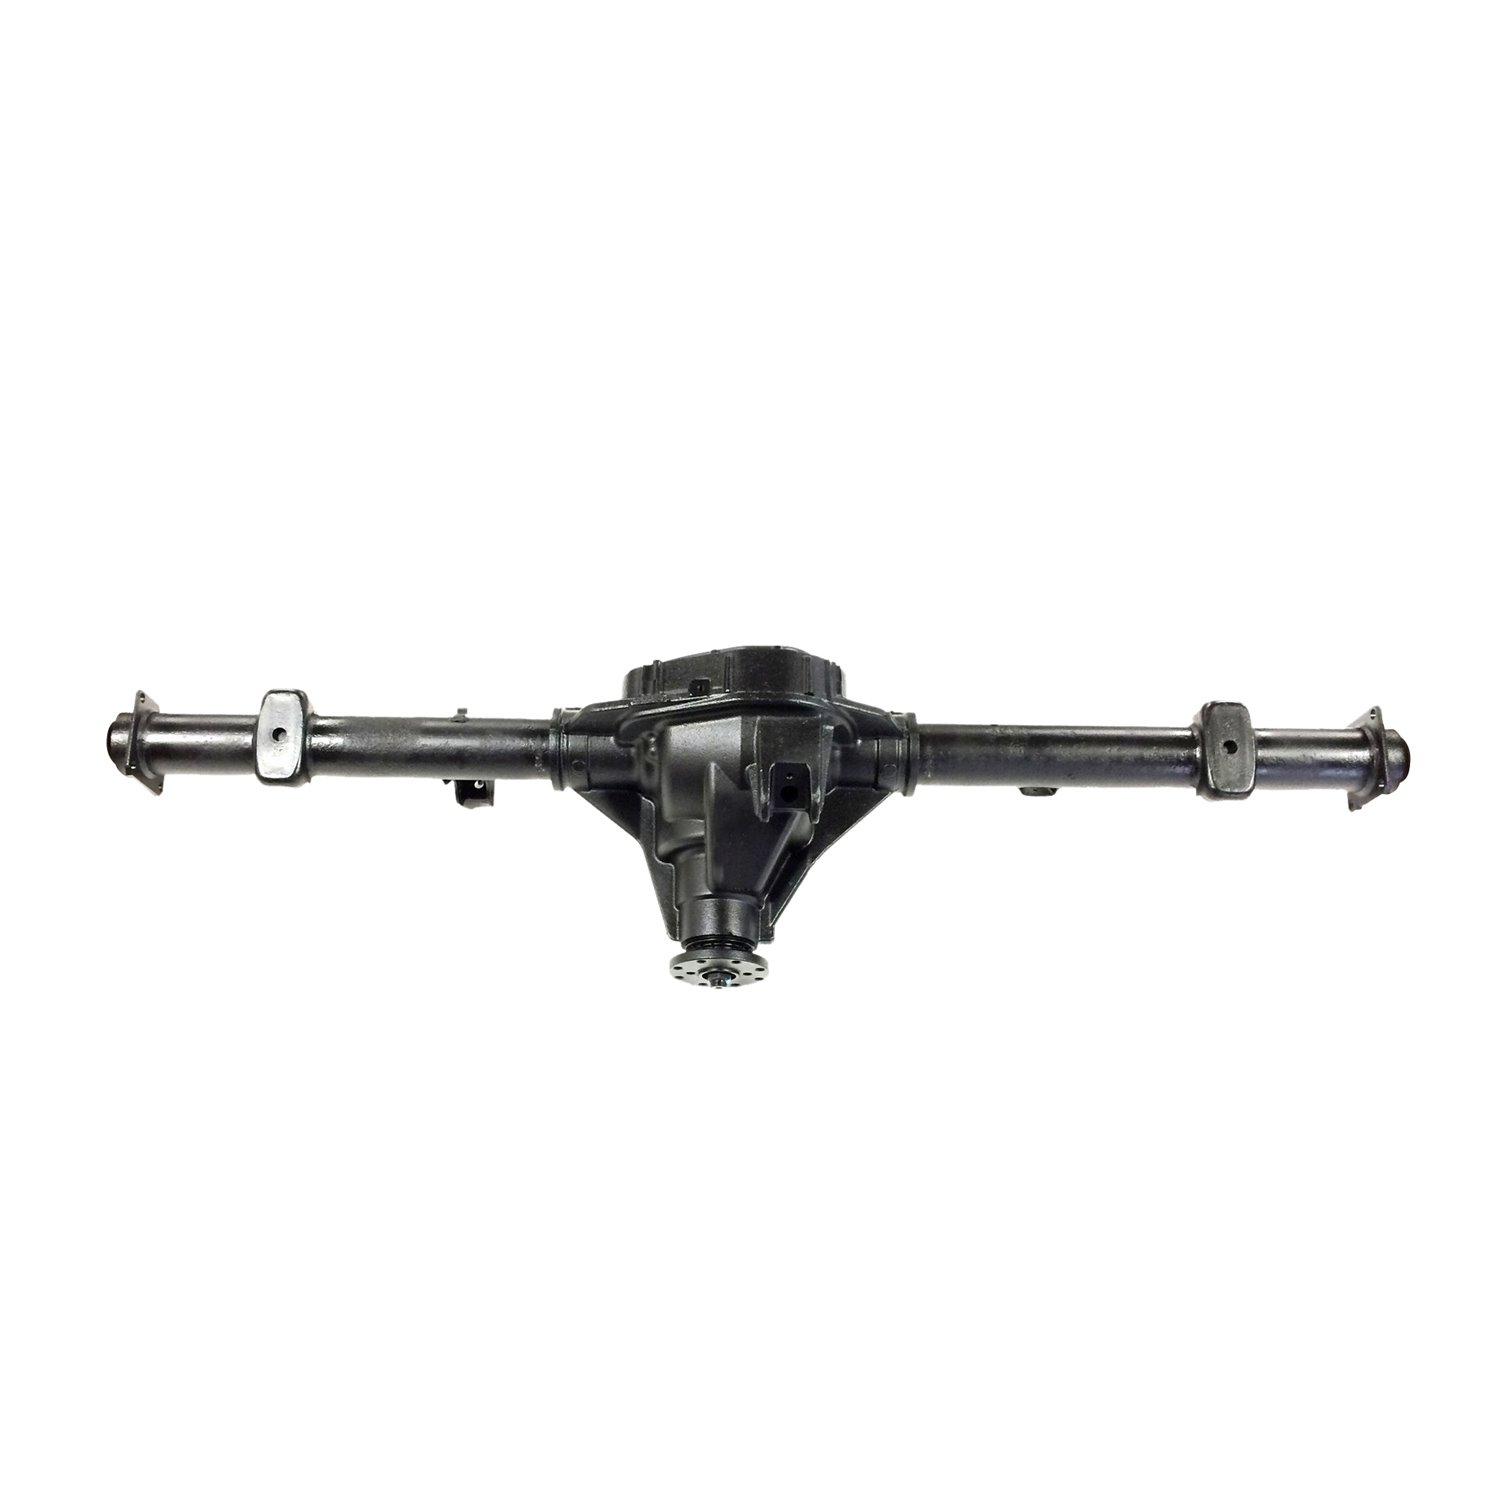 Remanufactured Complete Axle Assembly for 9.75" 2000 F150 3.31, Rear Drum *Check Tag*